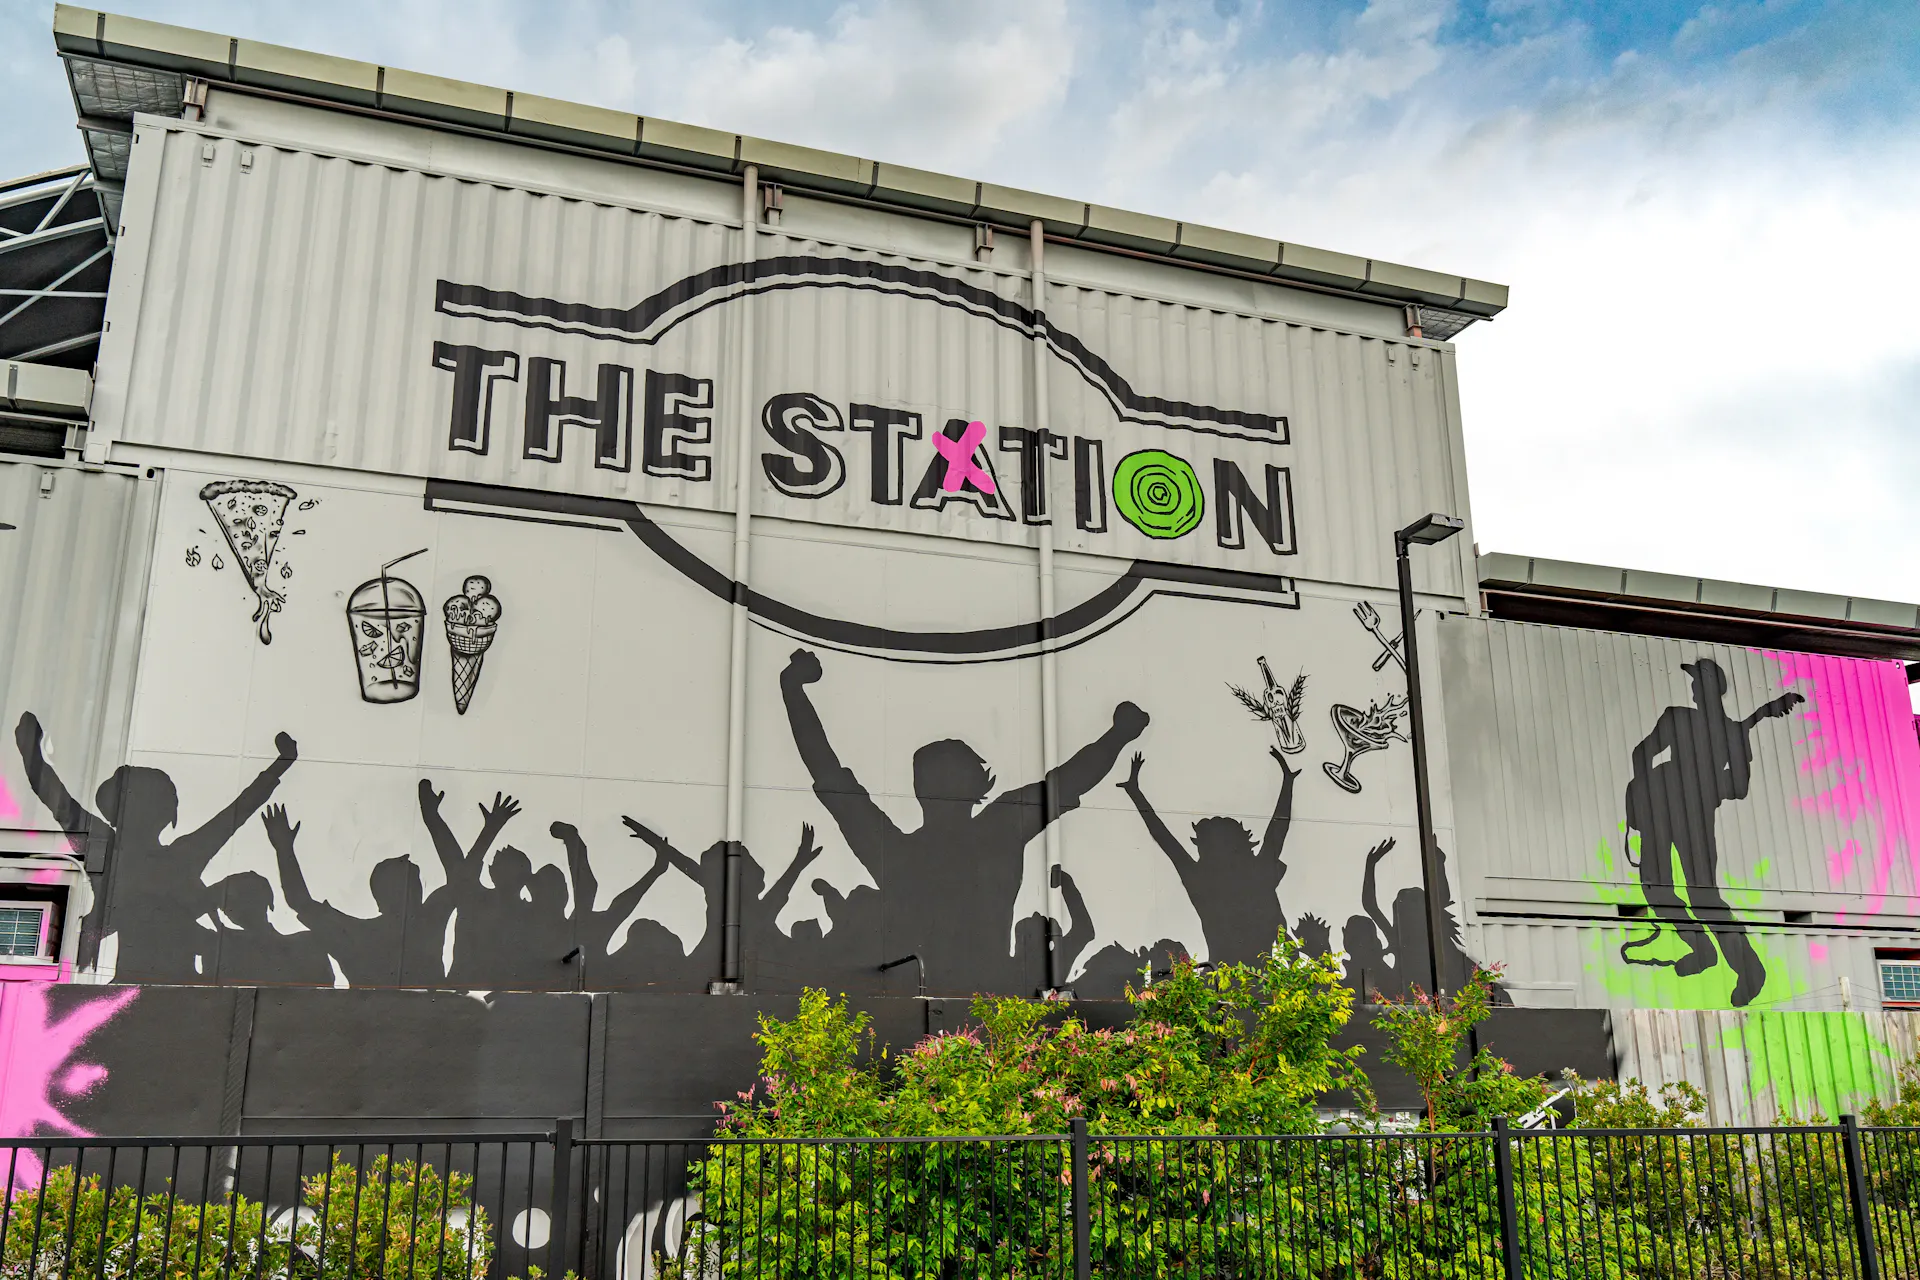 External wall of building showing silhouette of audience with The Station logo